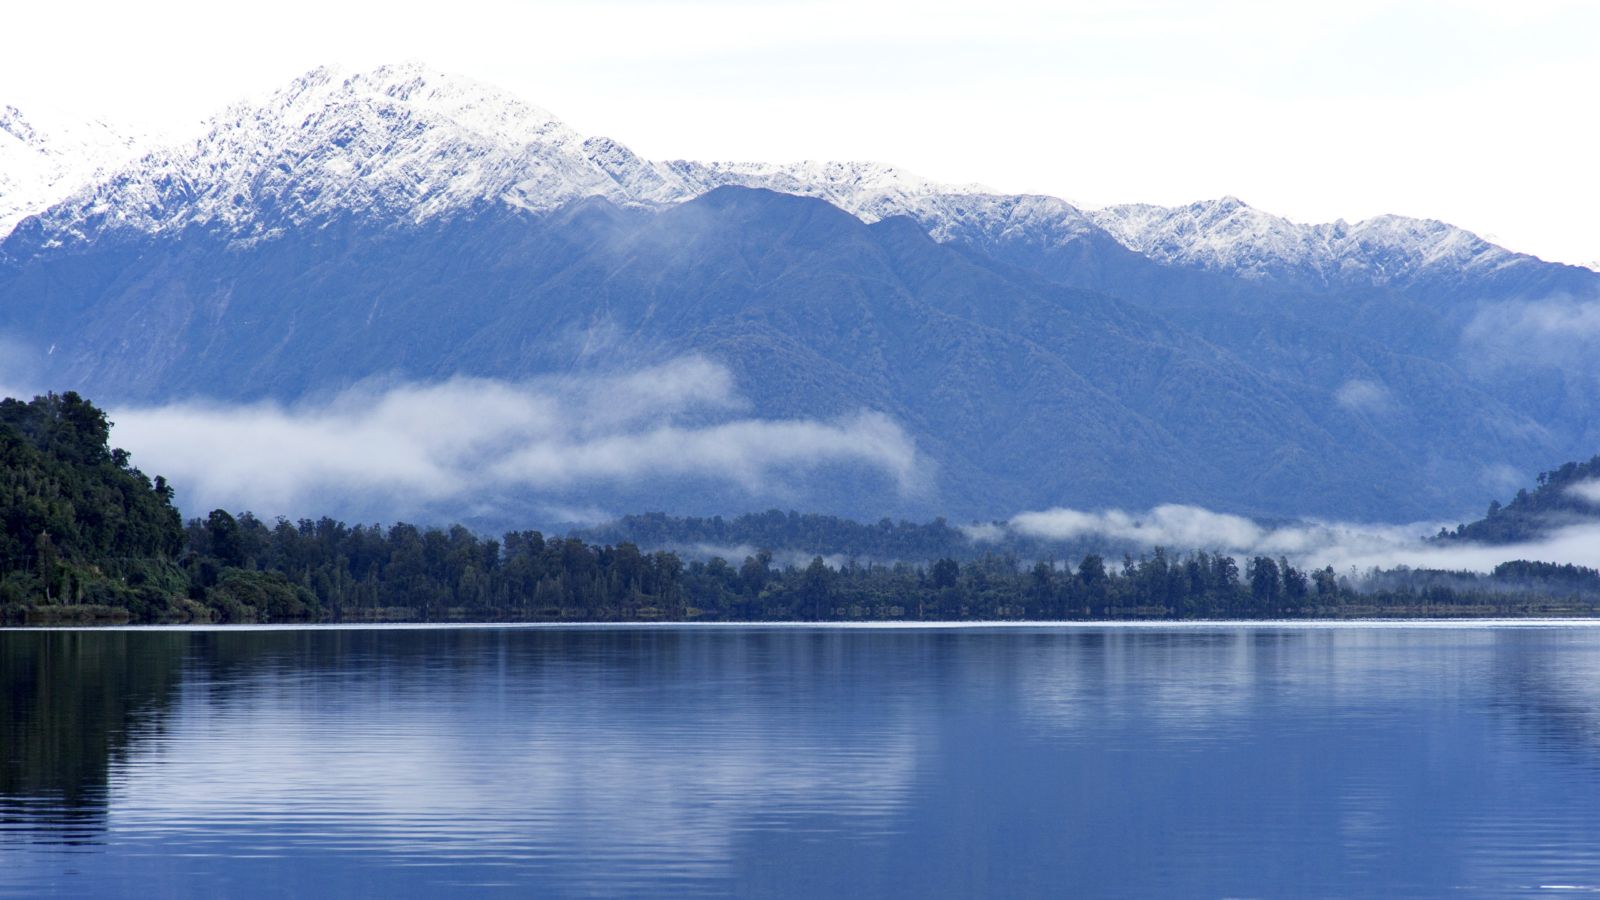 The shimmering water of Lake Mapourika with the Southern Alps in the background